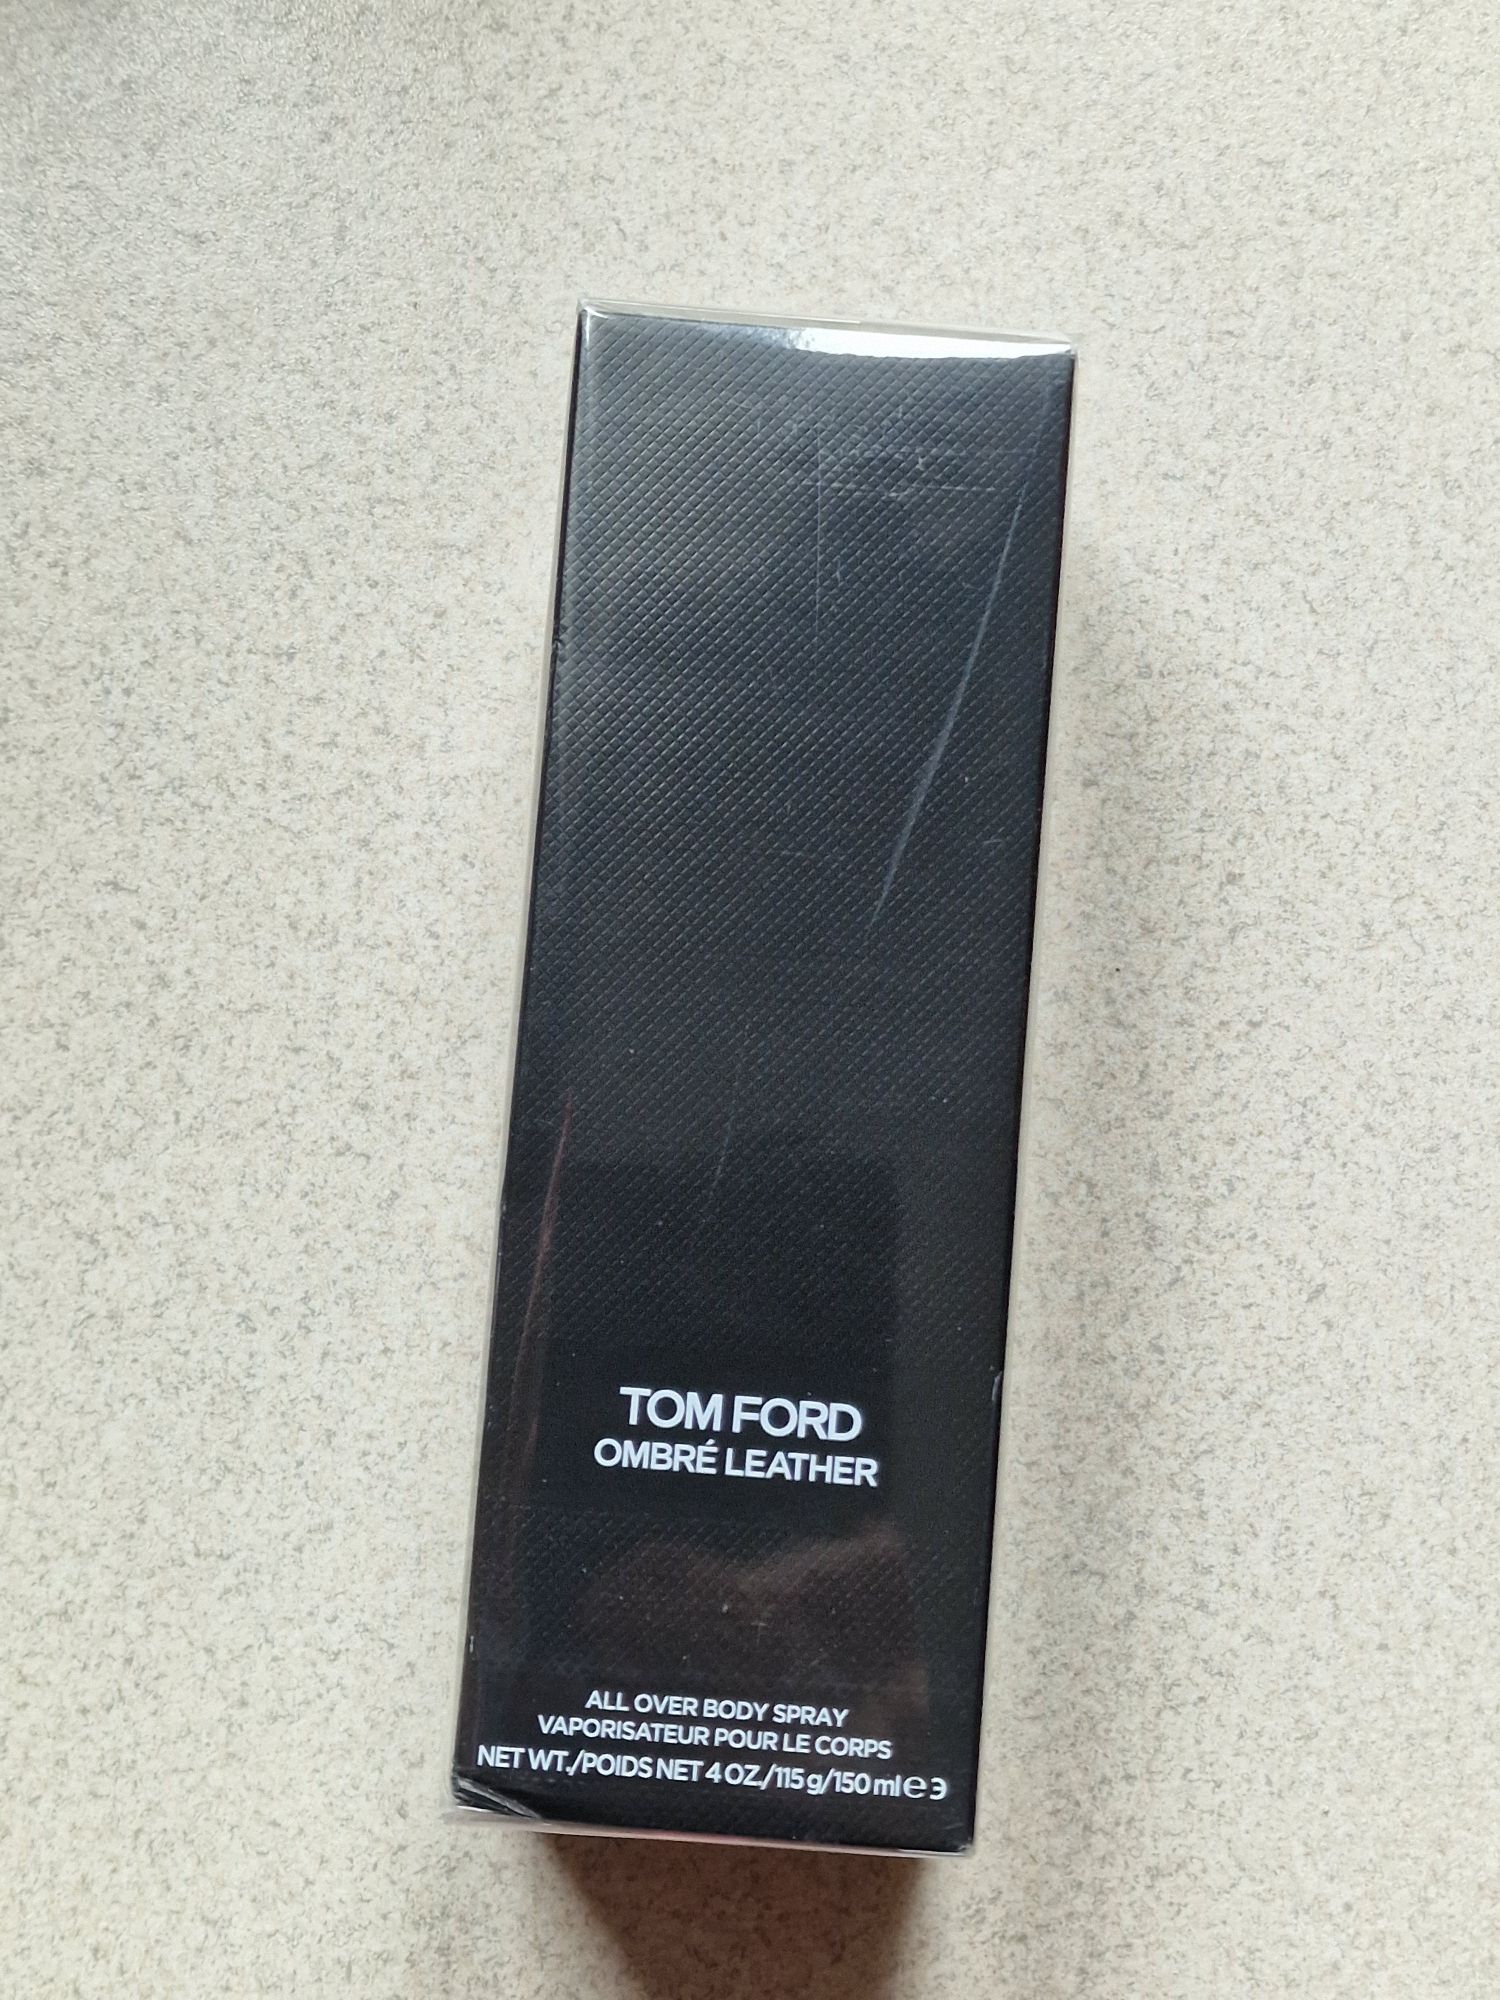 Tom Ford Ombre Leather all body spray